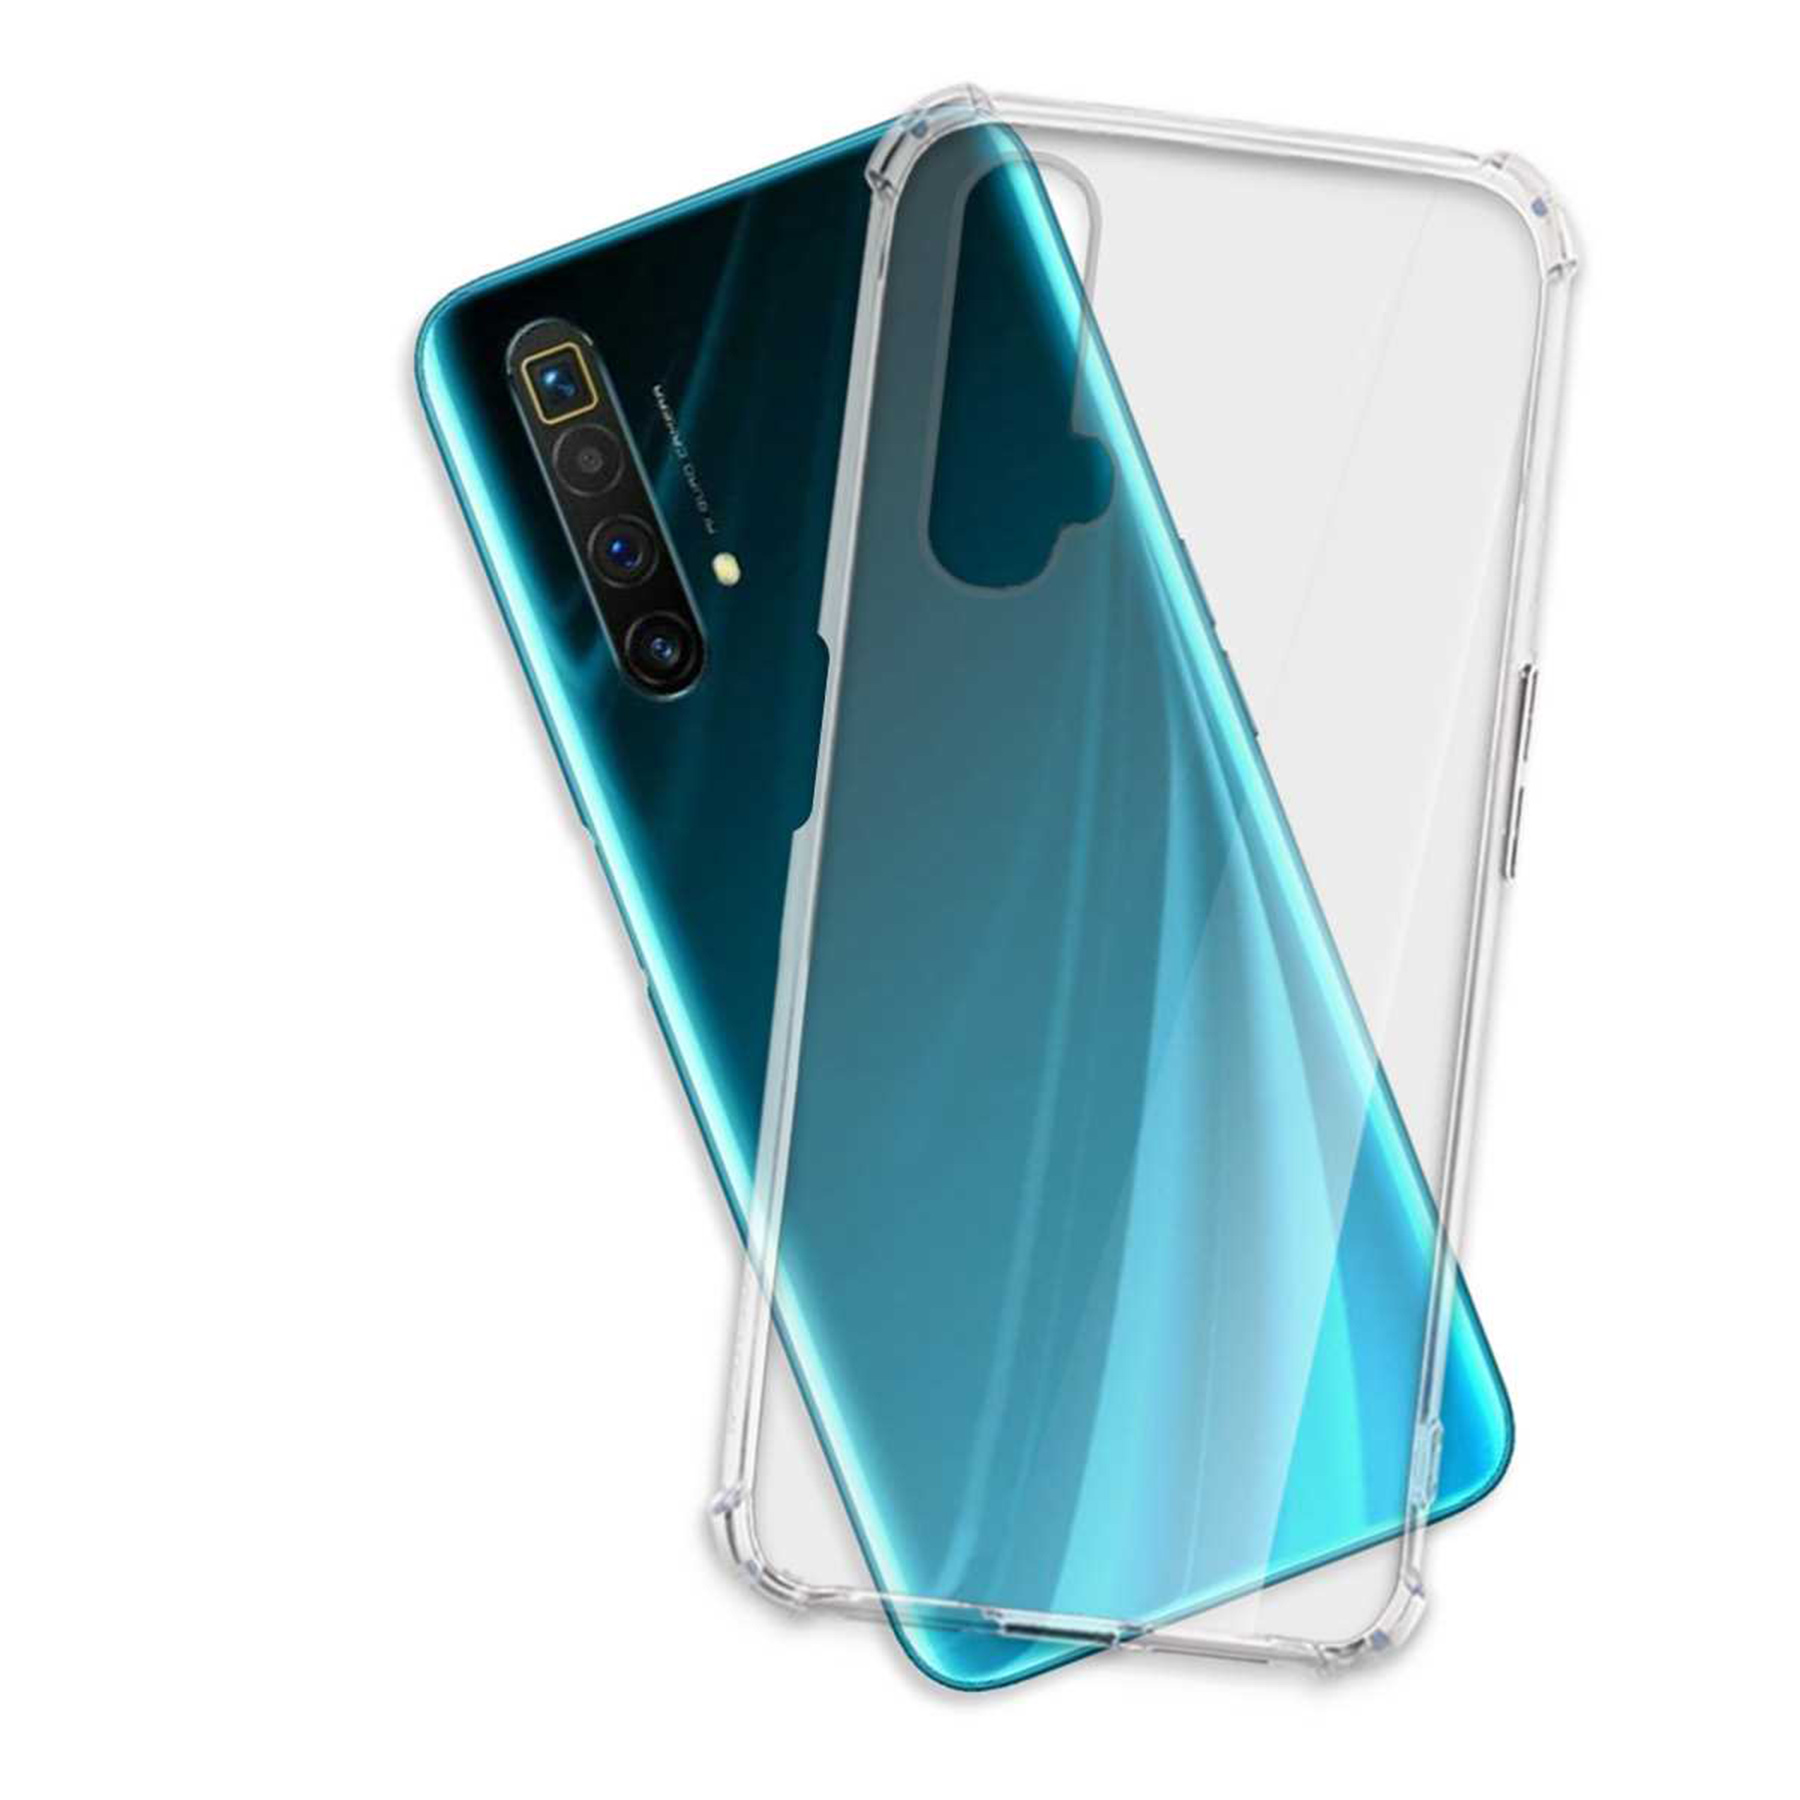 MTB MORE ENERGY SuperZoom, 5G, X3 5G, Realme, Armor Transparent Backcover, Case, X3, X50 Clear X50m